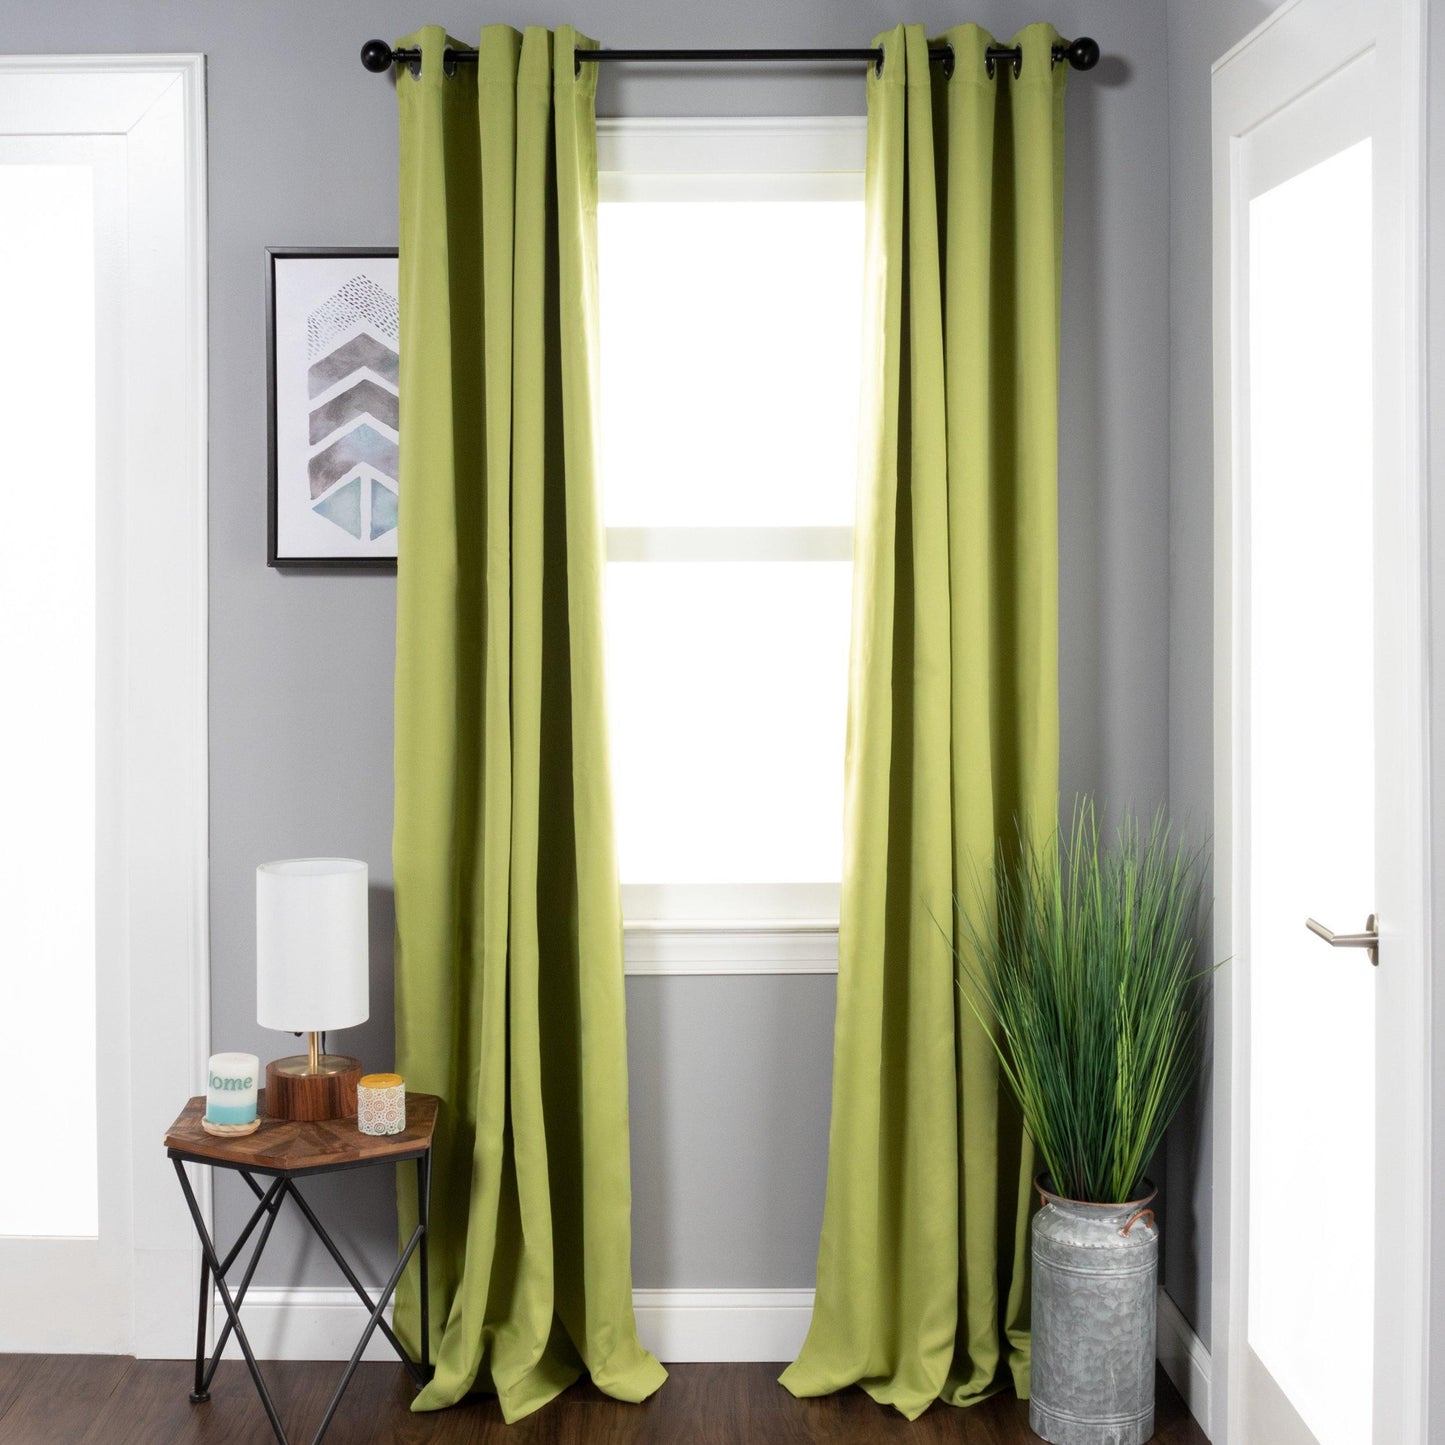 Blackout Drapes Thermal Bedroom Curtains Grommet Curtain Panels Energy Saving Curtains by Superior FredCo